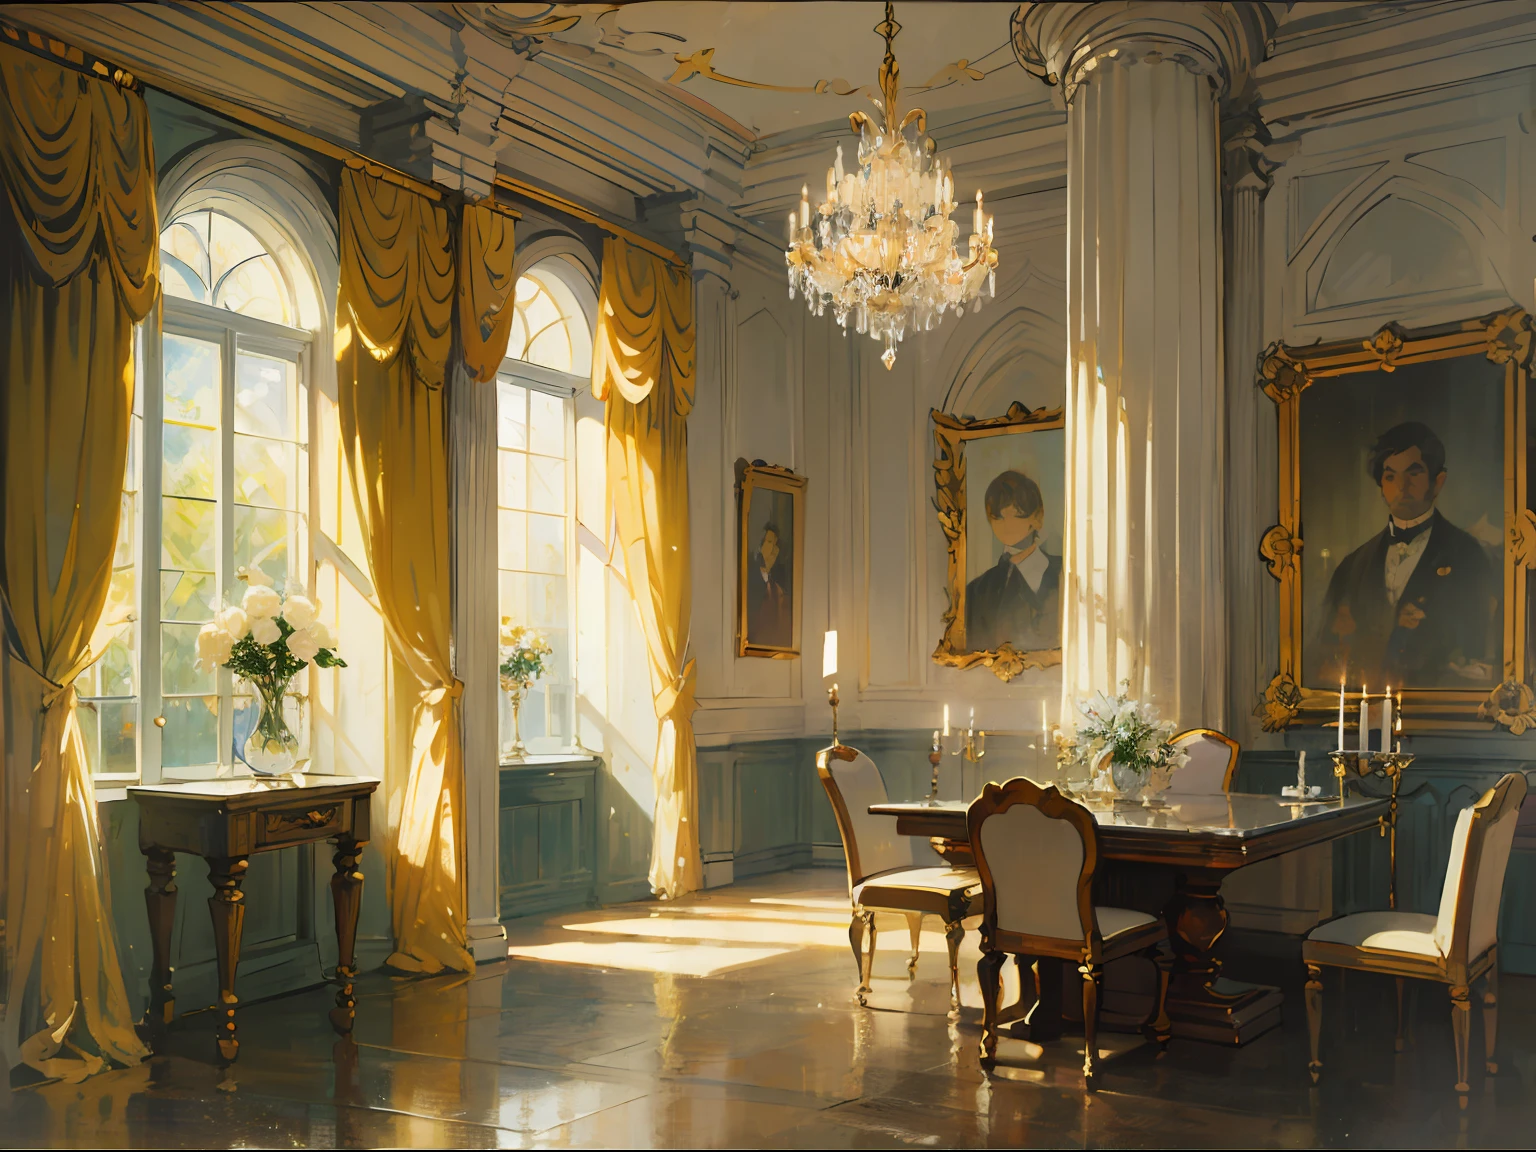 ((Ballroom)), ((candles)), (columns), chandeliers), (crystal), (marble), (gold details), (curtains), (19 century), (Renoir), (many), (oil painting), (Sketch)